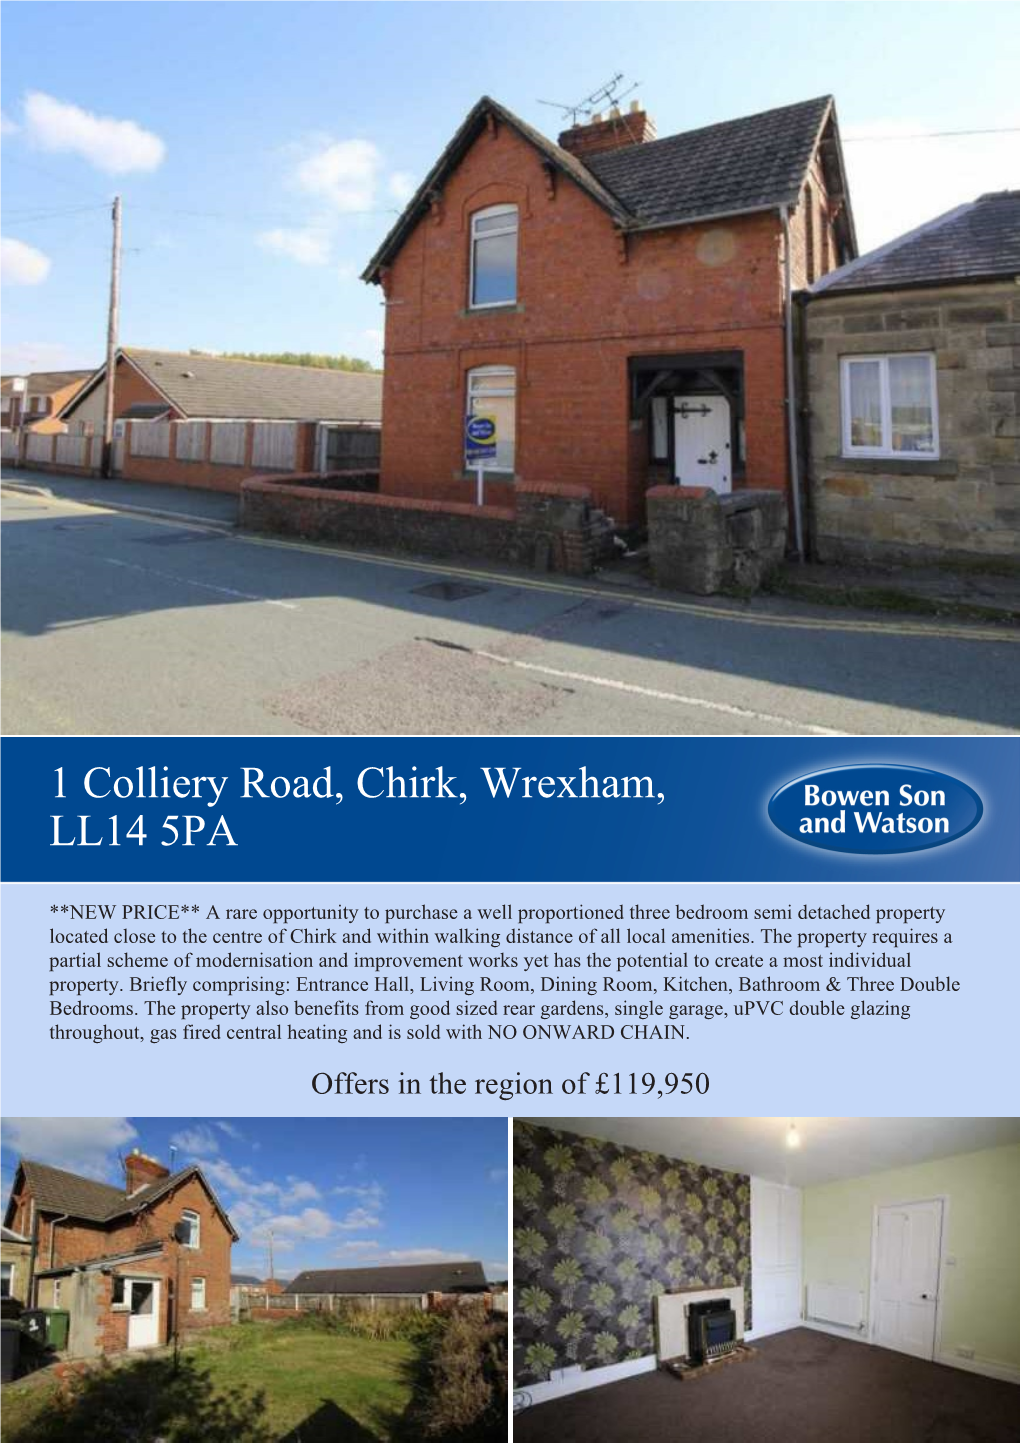 1 Colliery Road, Chirk, Wrexham, LL14 5PA